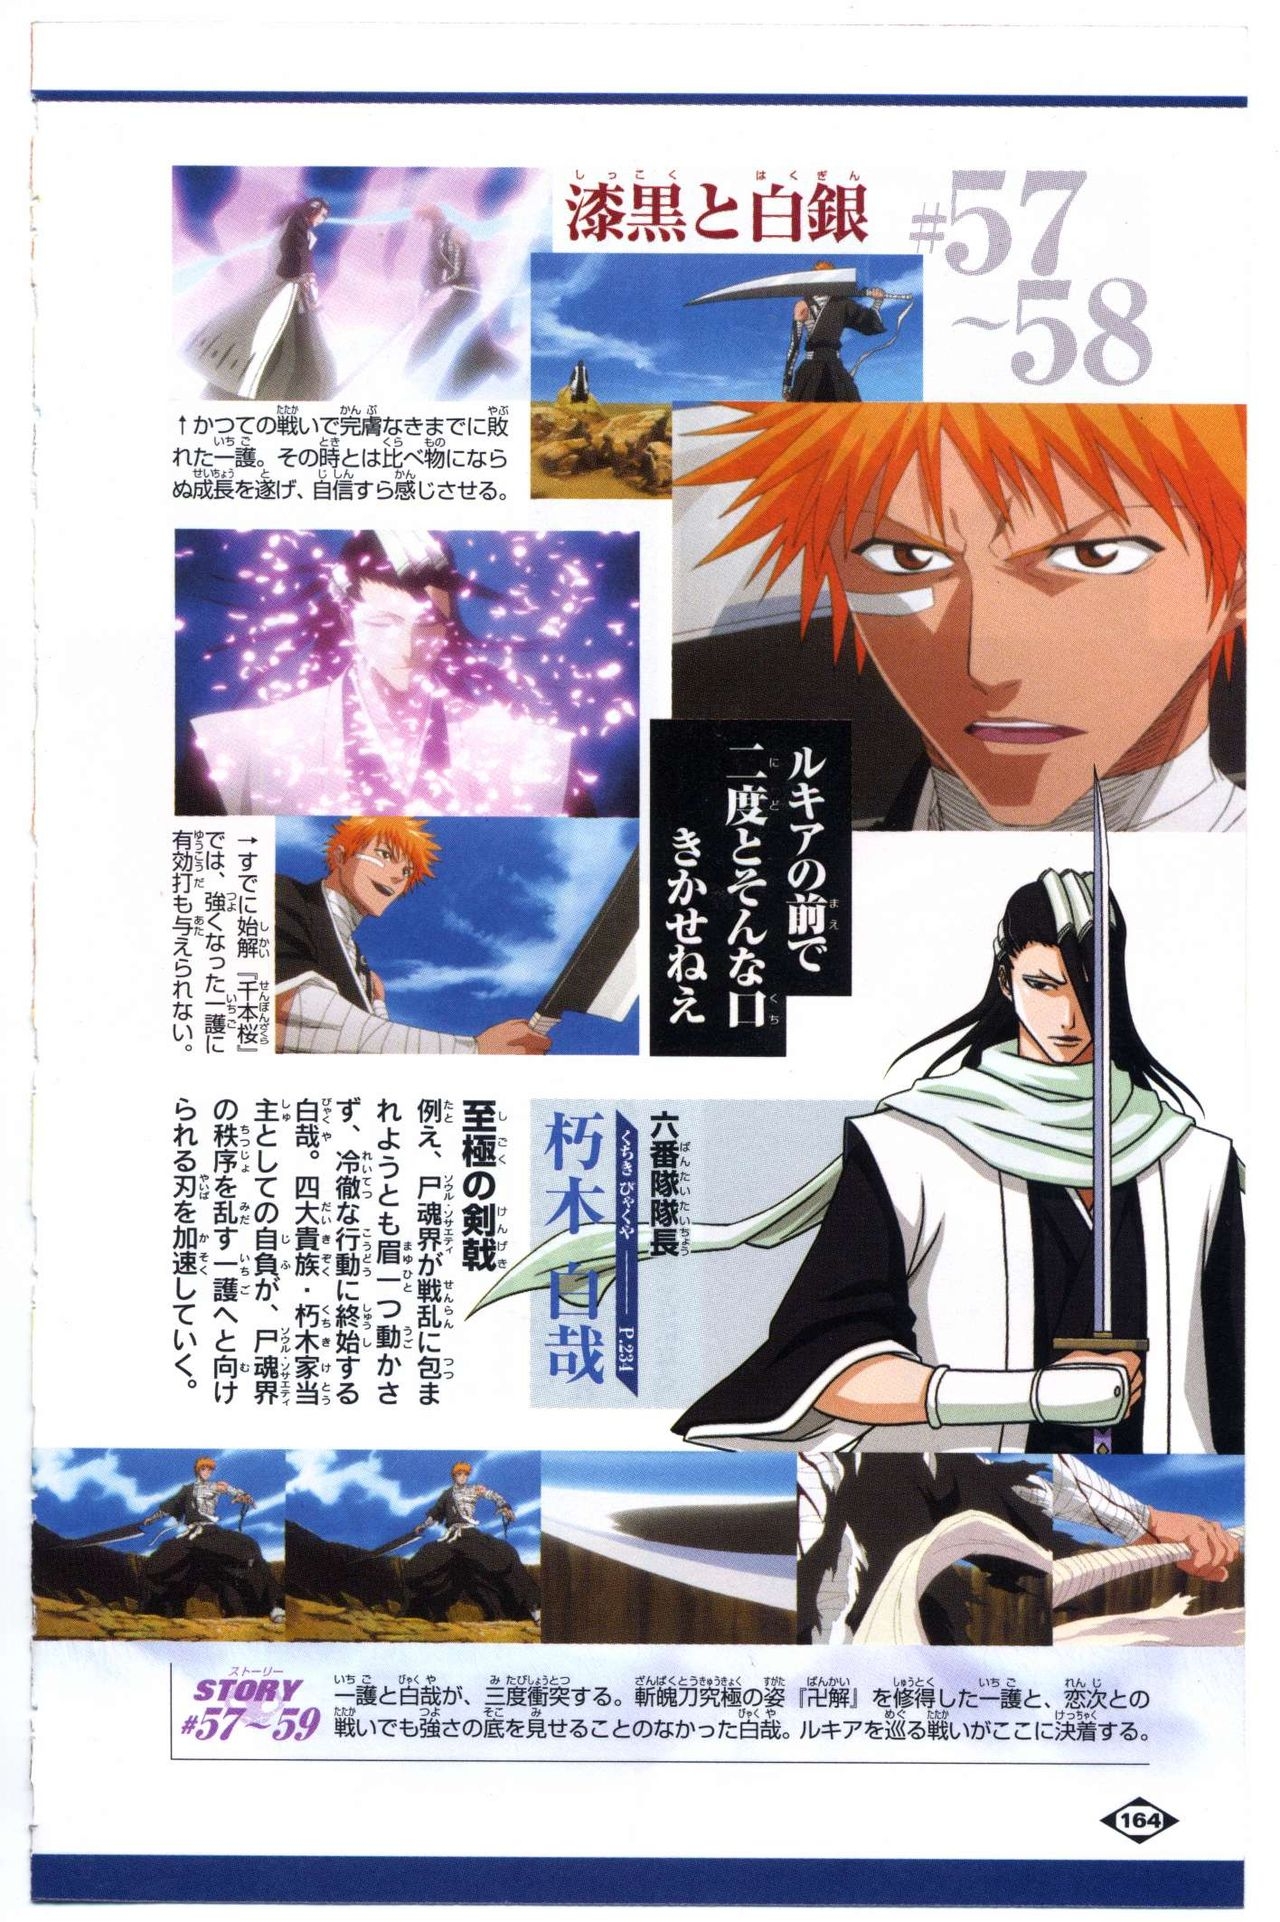 Bleach: Official Animation Book VIBEs 164